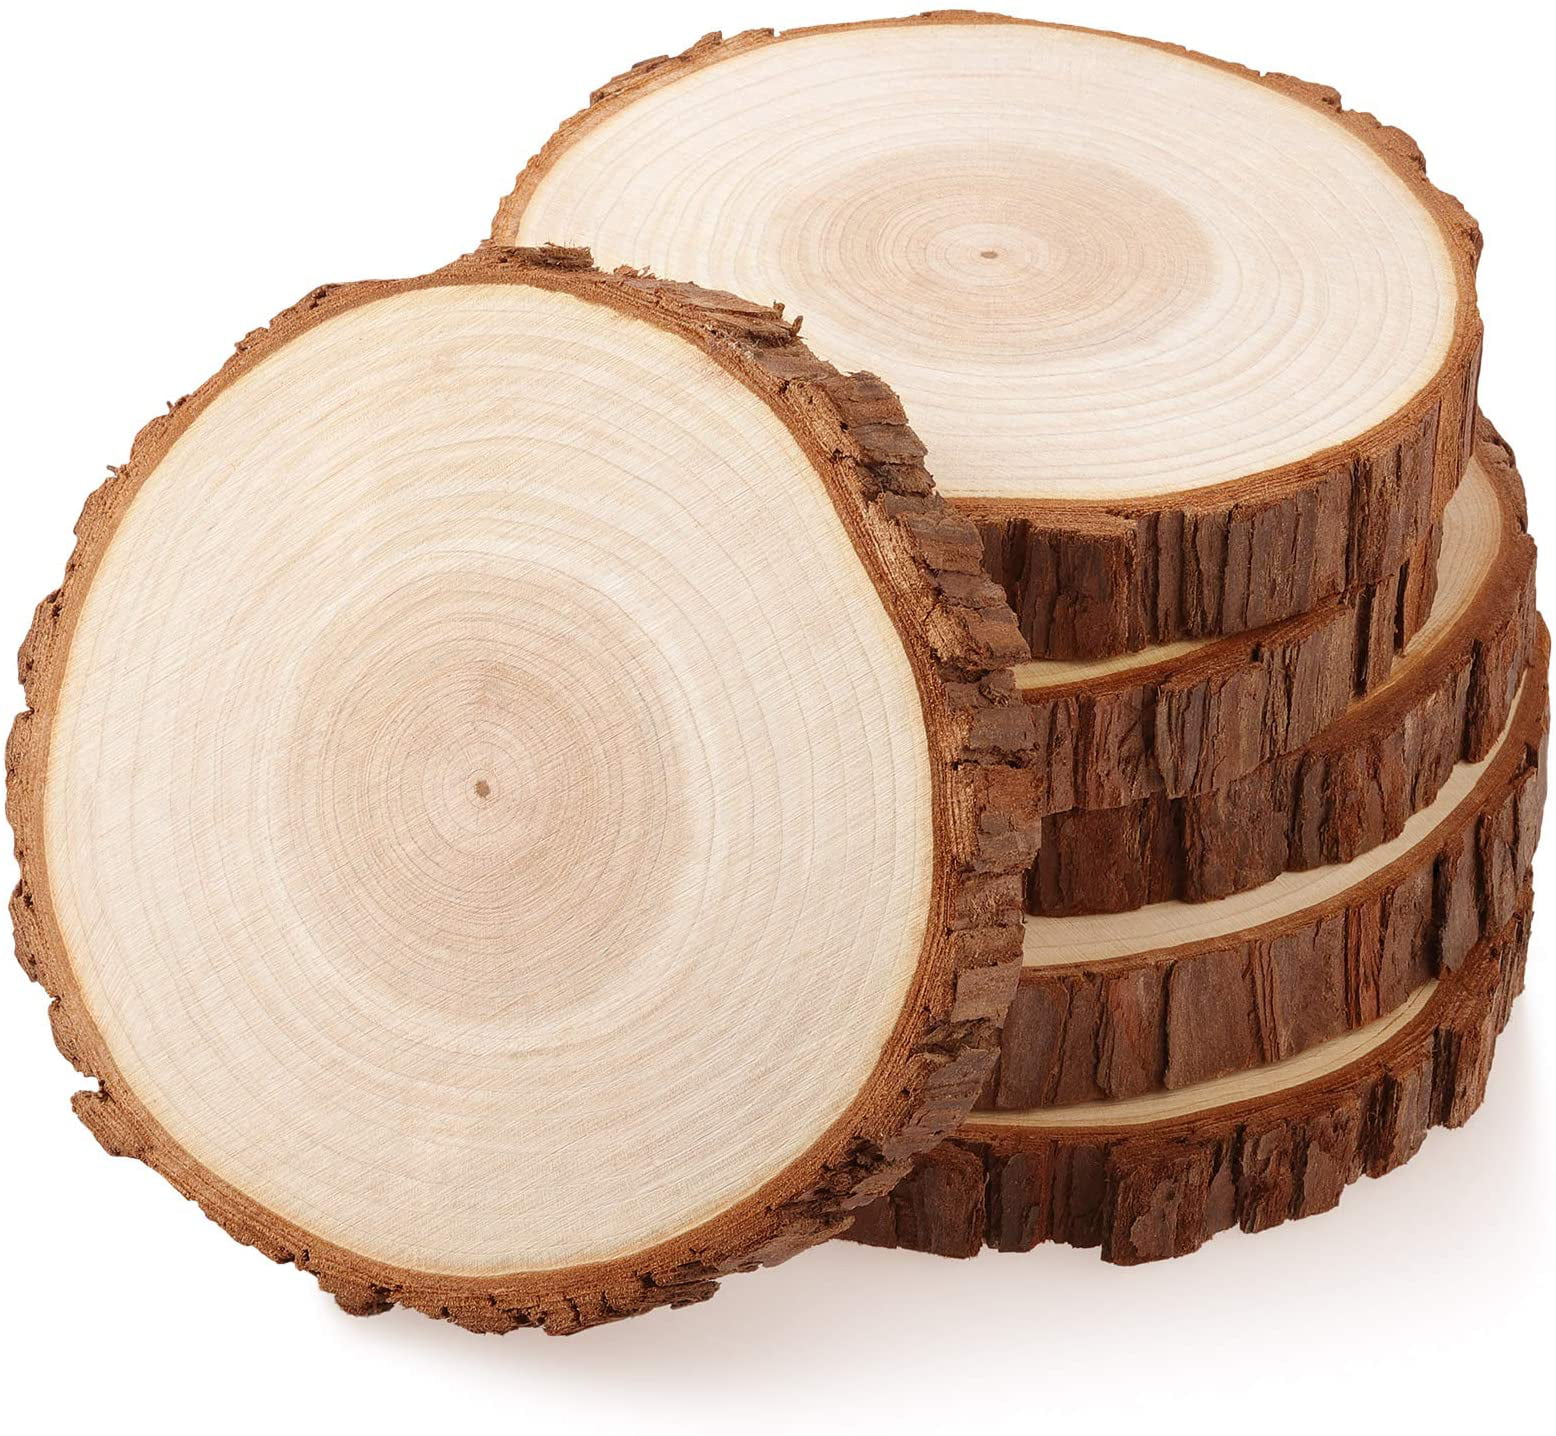 20 PCS Wood Log Slices Discs For DIY Crafts Party Wedding Table Decorations